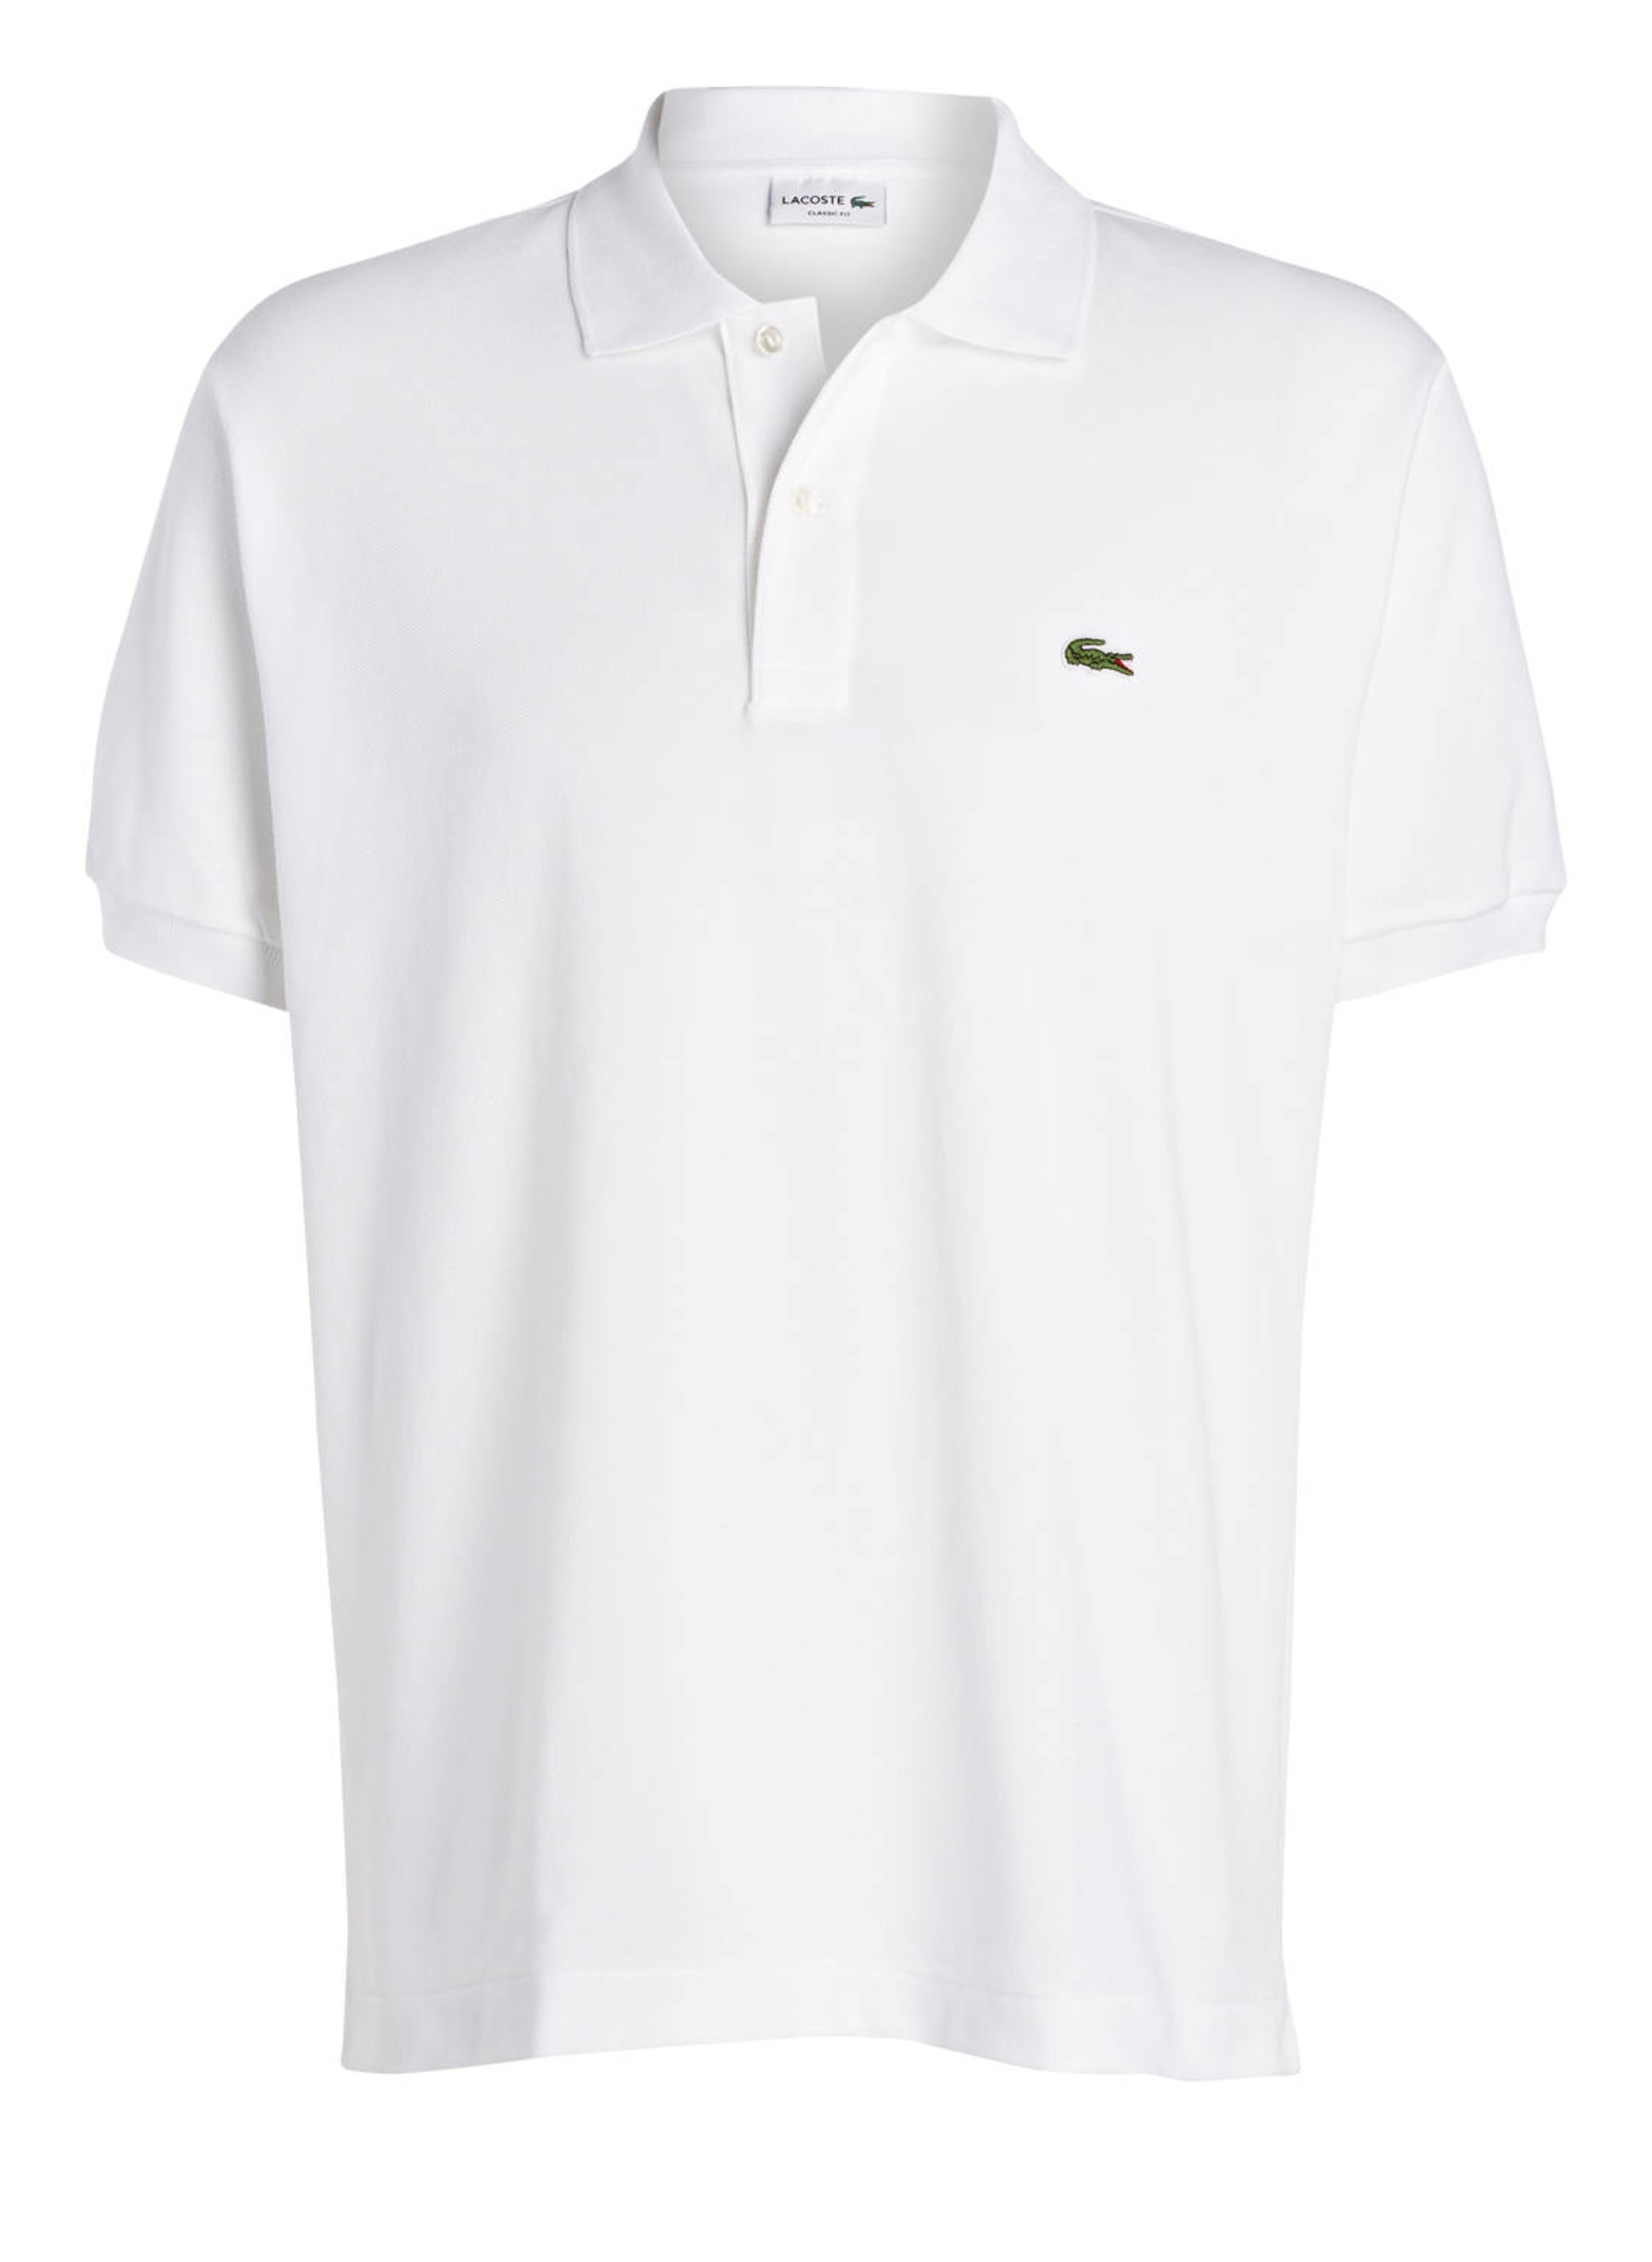 LACOSTE Piqué-Poloshirt Classic weiss Fit in